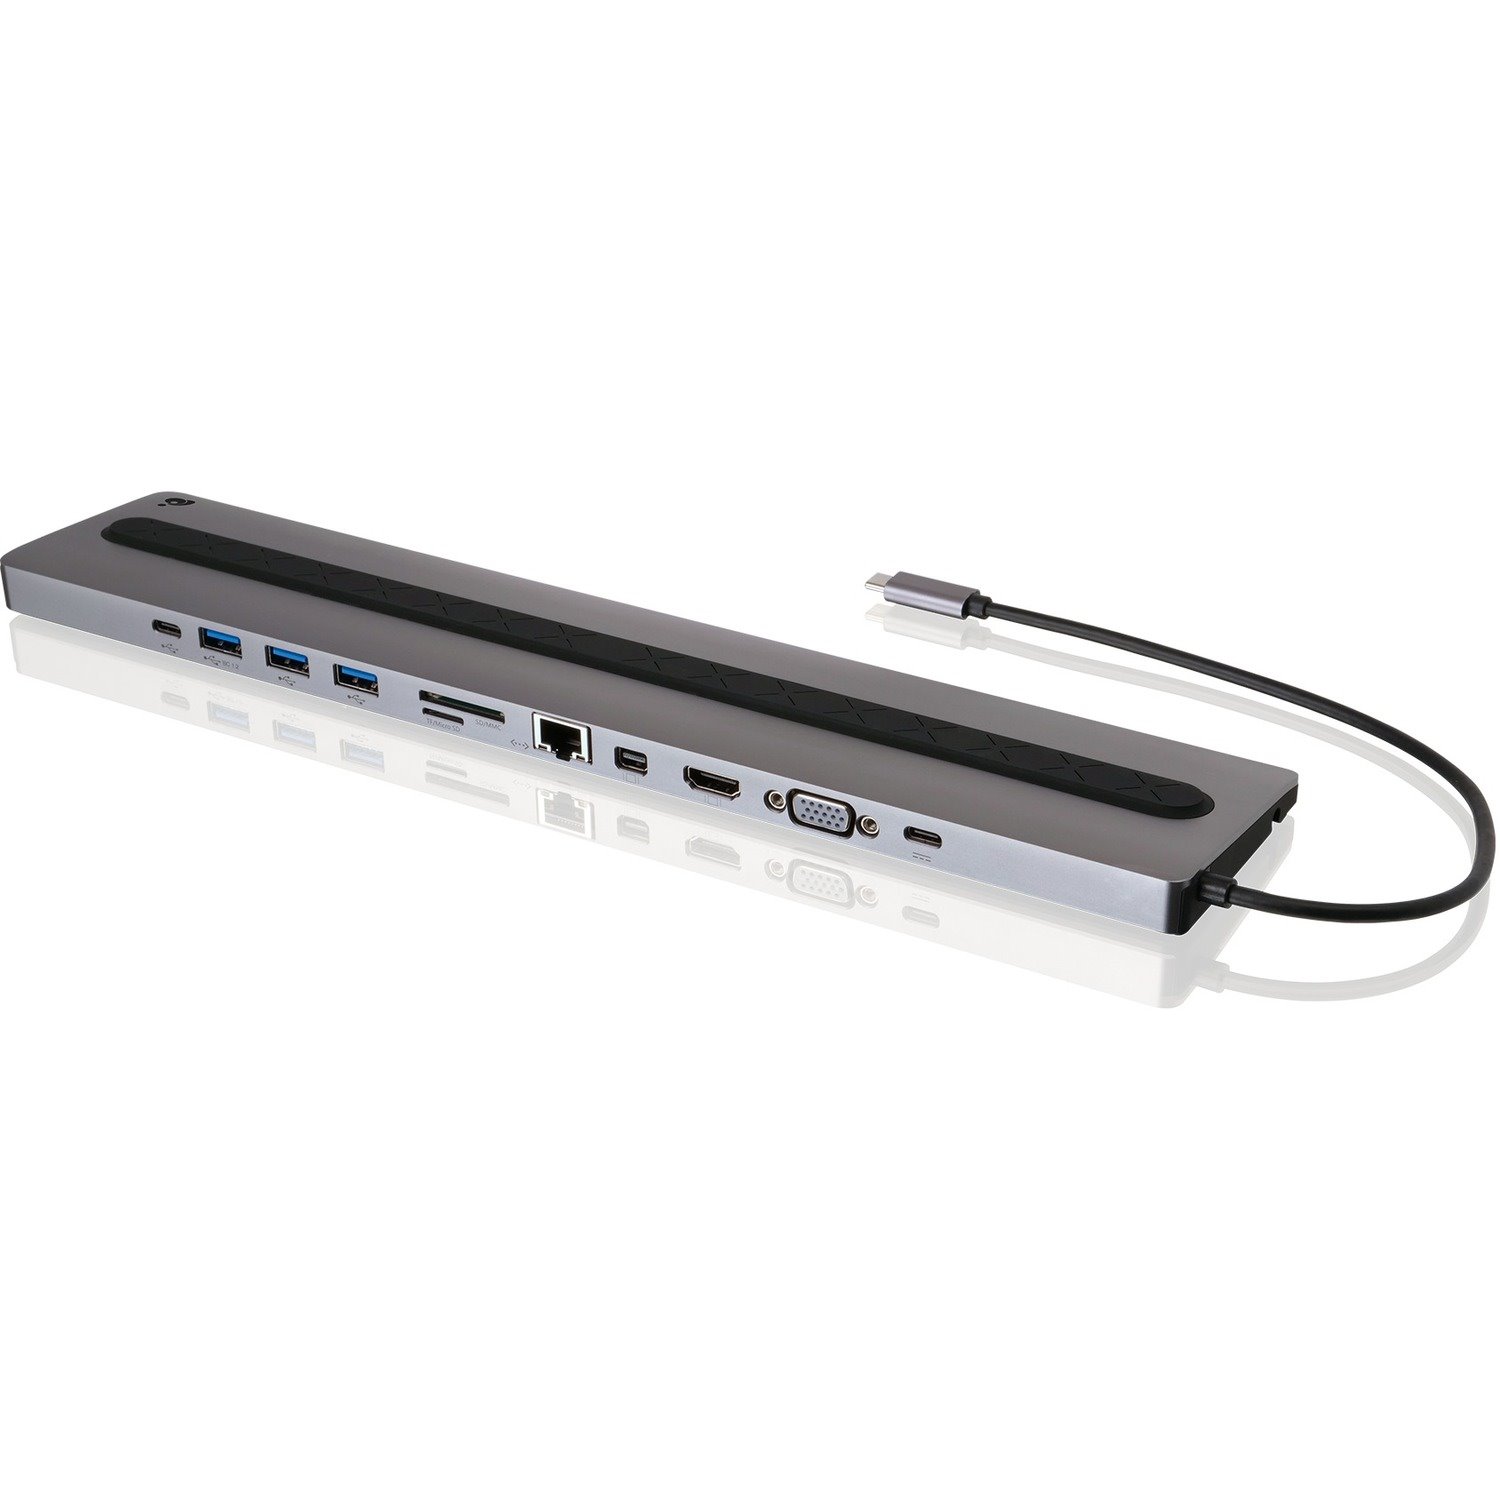 IOGEAR USB-C Docking Station with Power Delivery 3.0